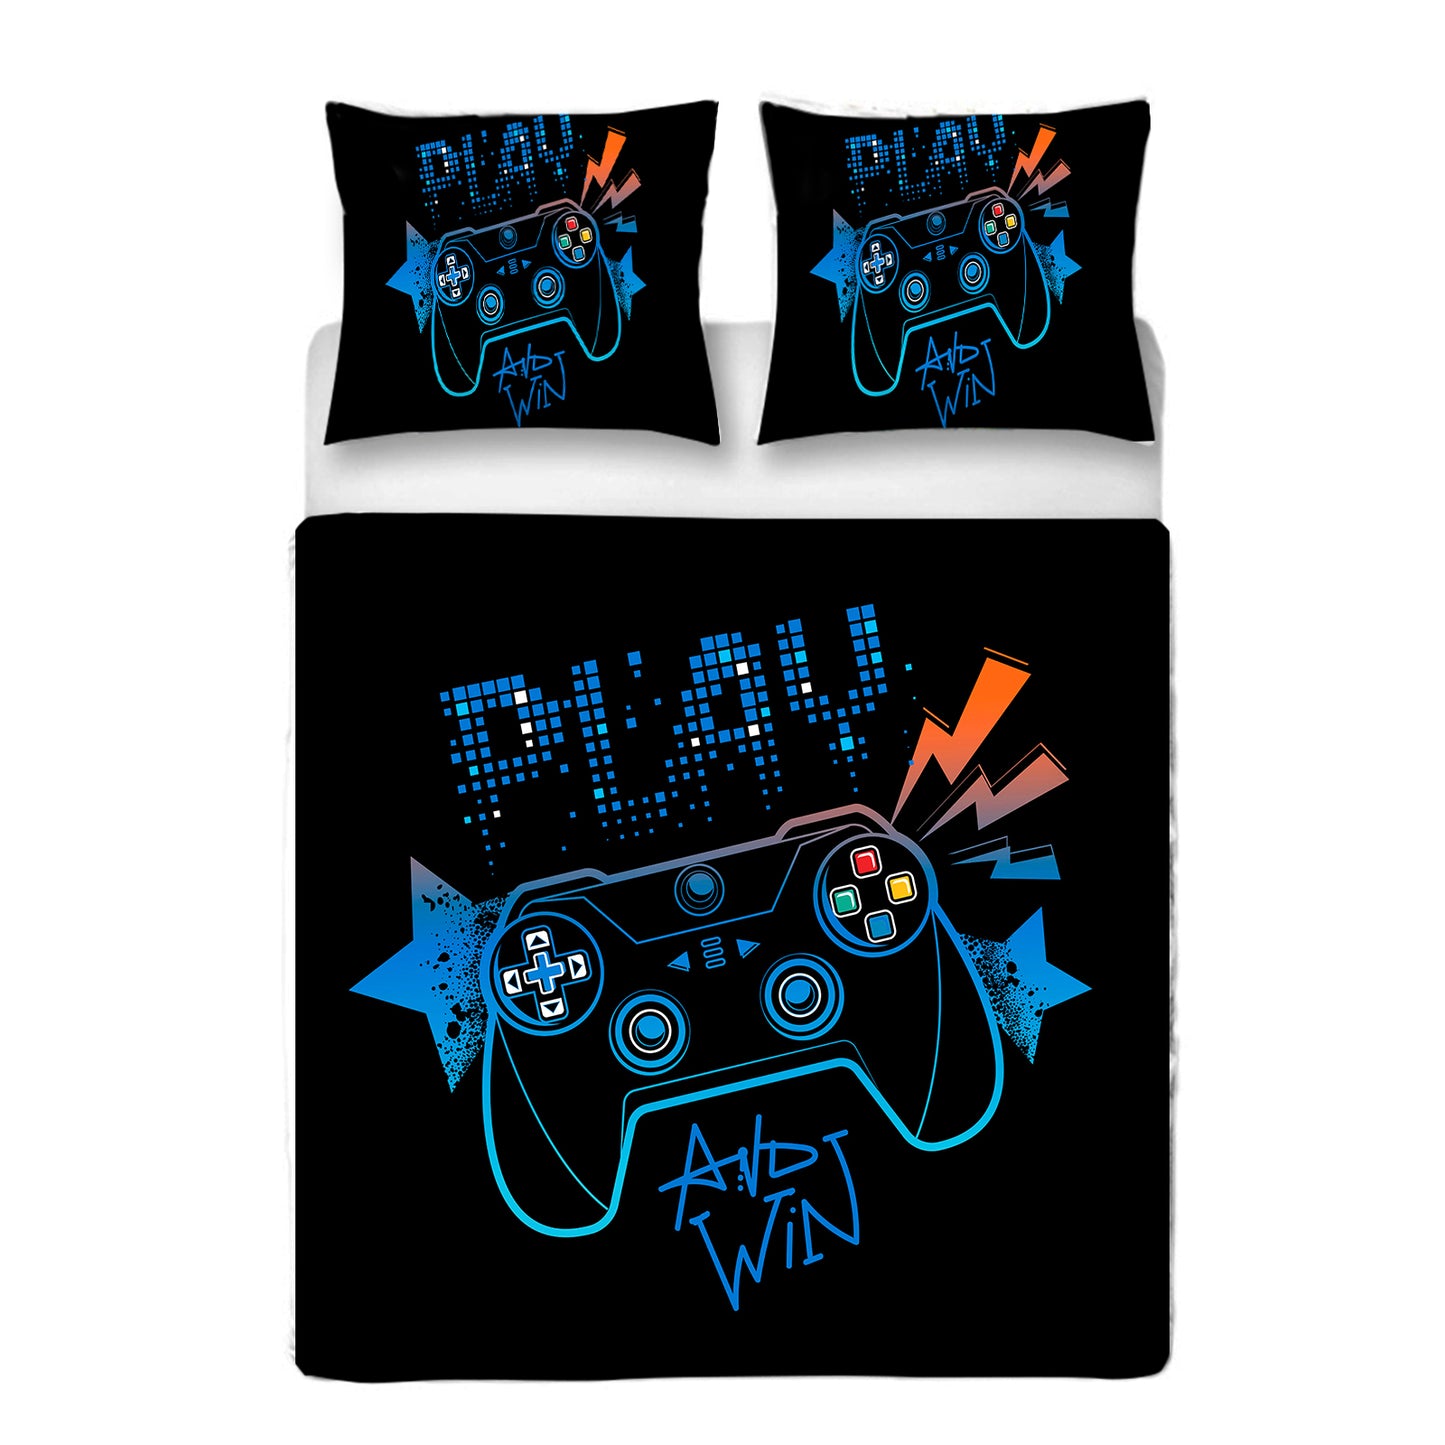 Gamepad Duvet Cover with 2 Pillow cases